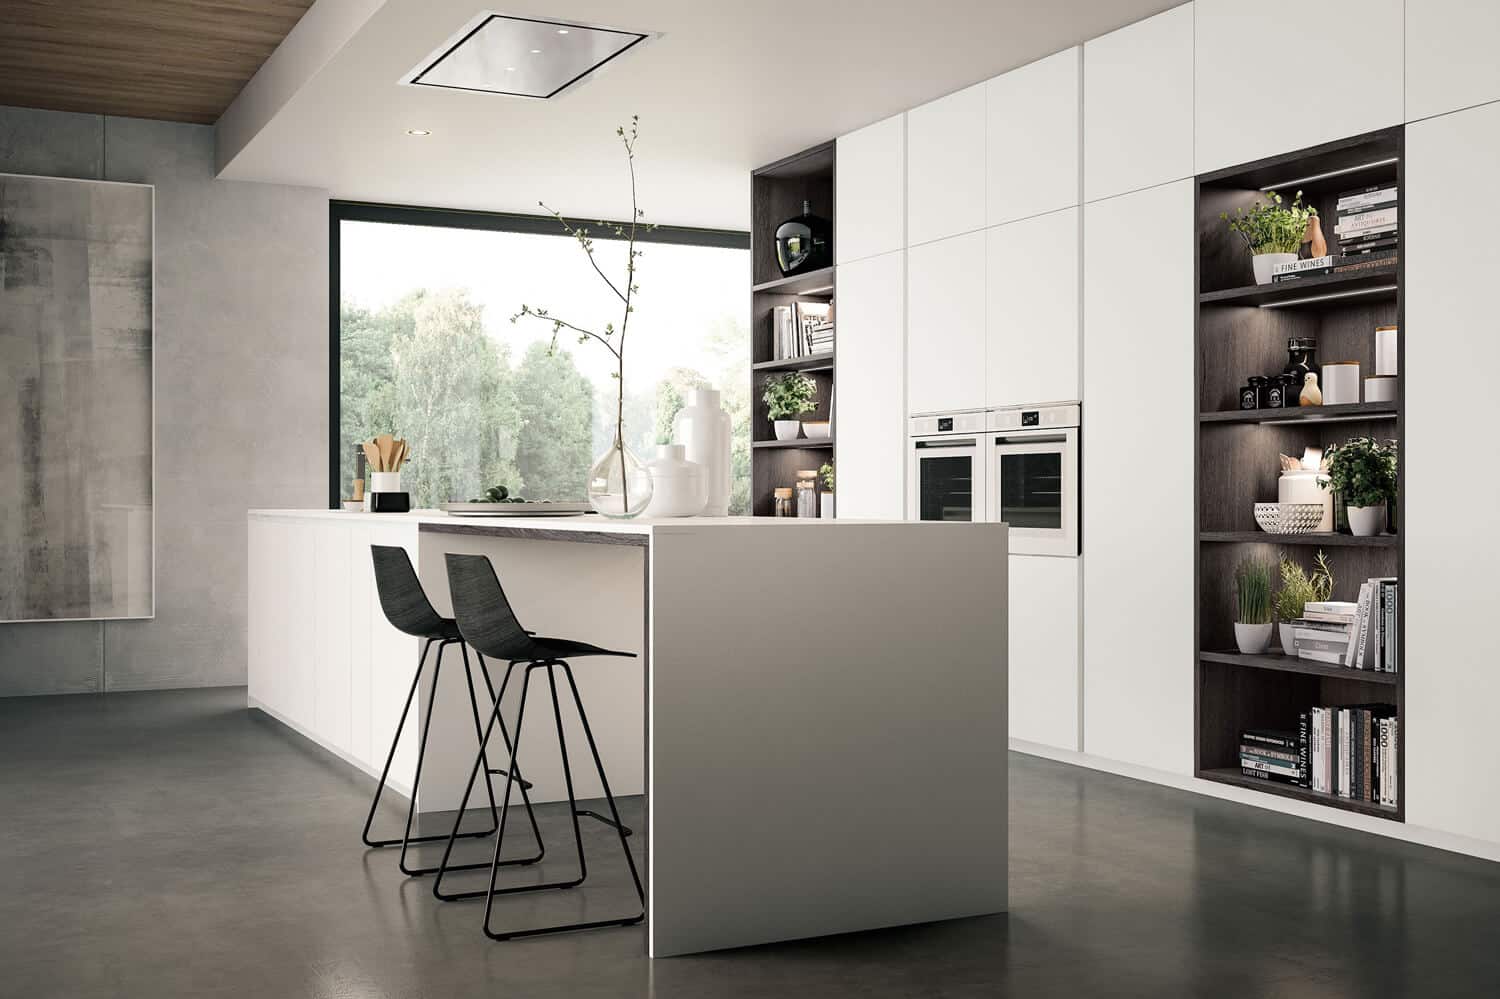 Side view of the white lacquer kitchen with the shelf niches in dark wood.